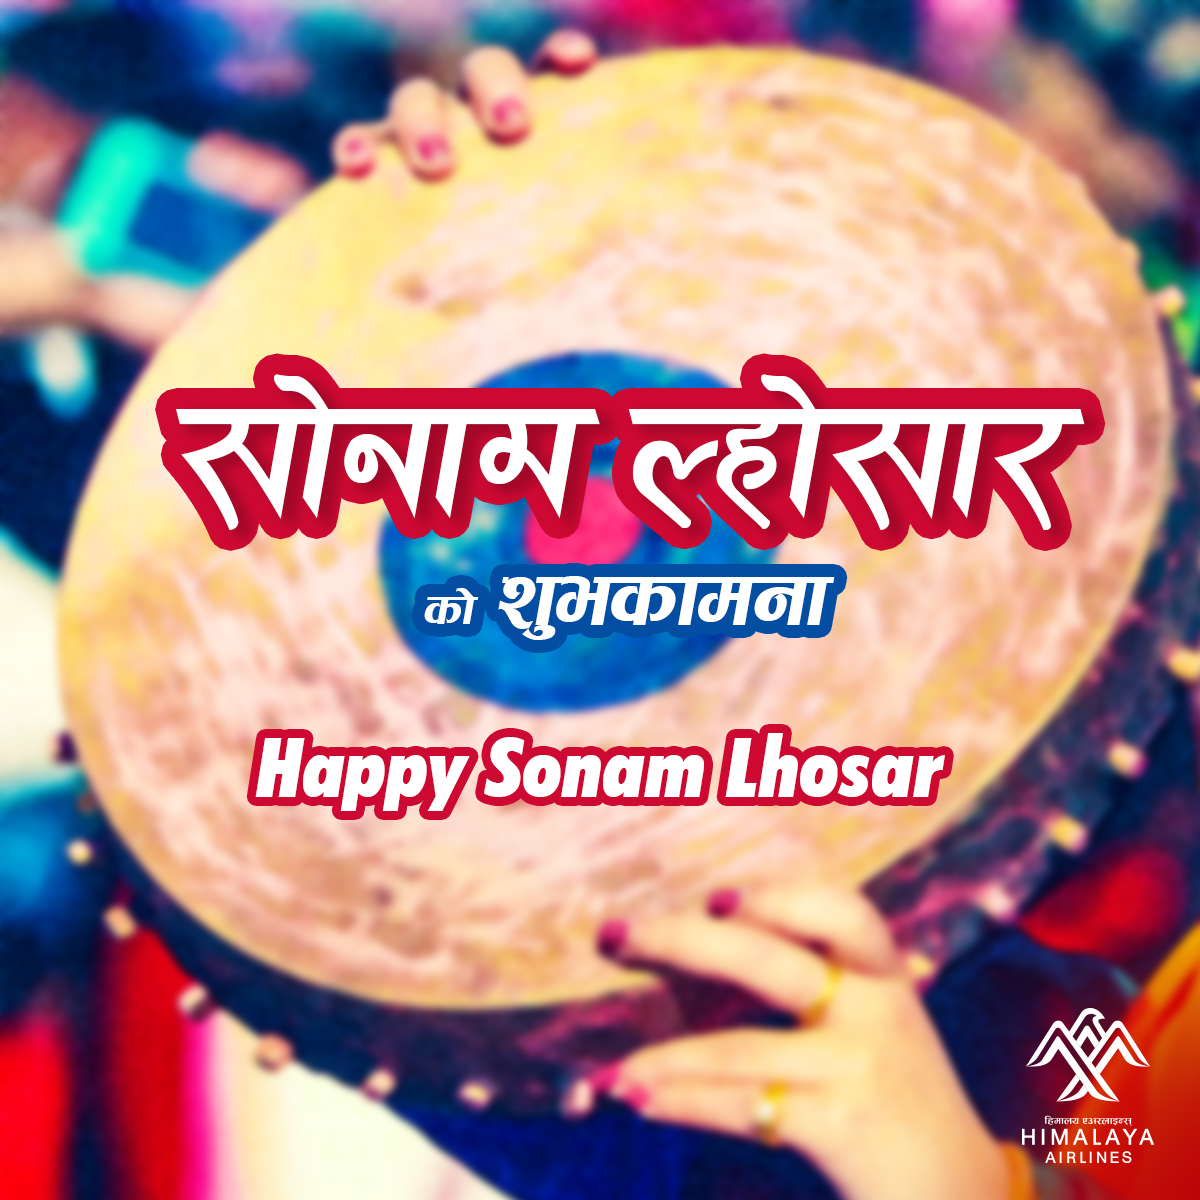 Sonam Lhosar is a festival of Nepal celebrated by the Tamang and Yolmo Community, to mark the beginning of the new year of the Tibetan Calendar.
#SonamLhosar #NewMoon #festivals #celebrationtime #HimalayaAirlines #H9 #HimalayaFamily #h9crew #FlyHimalaya